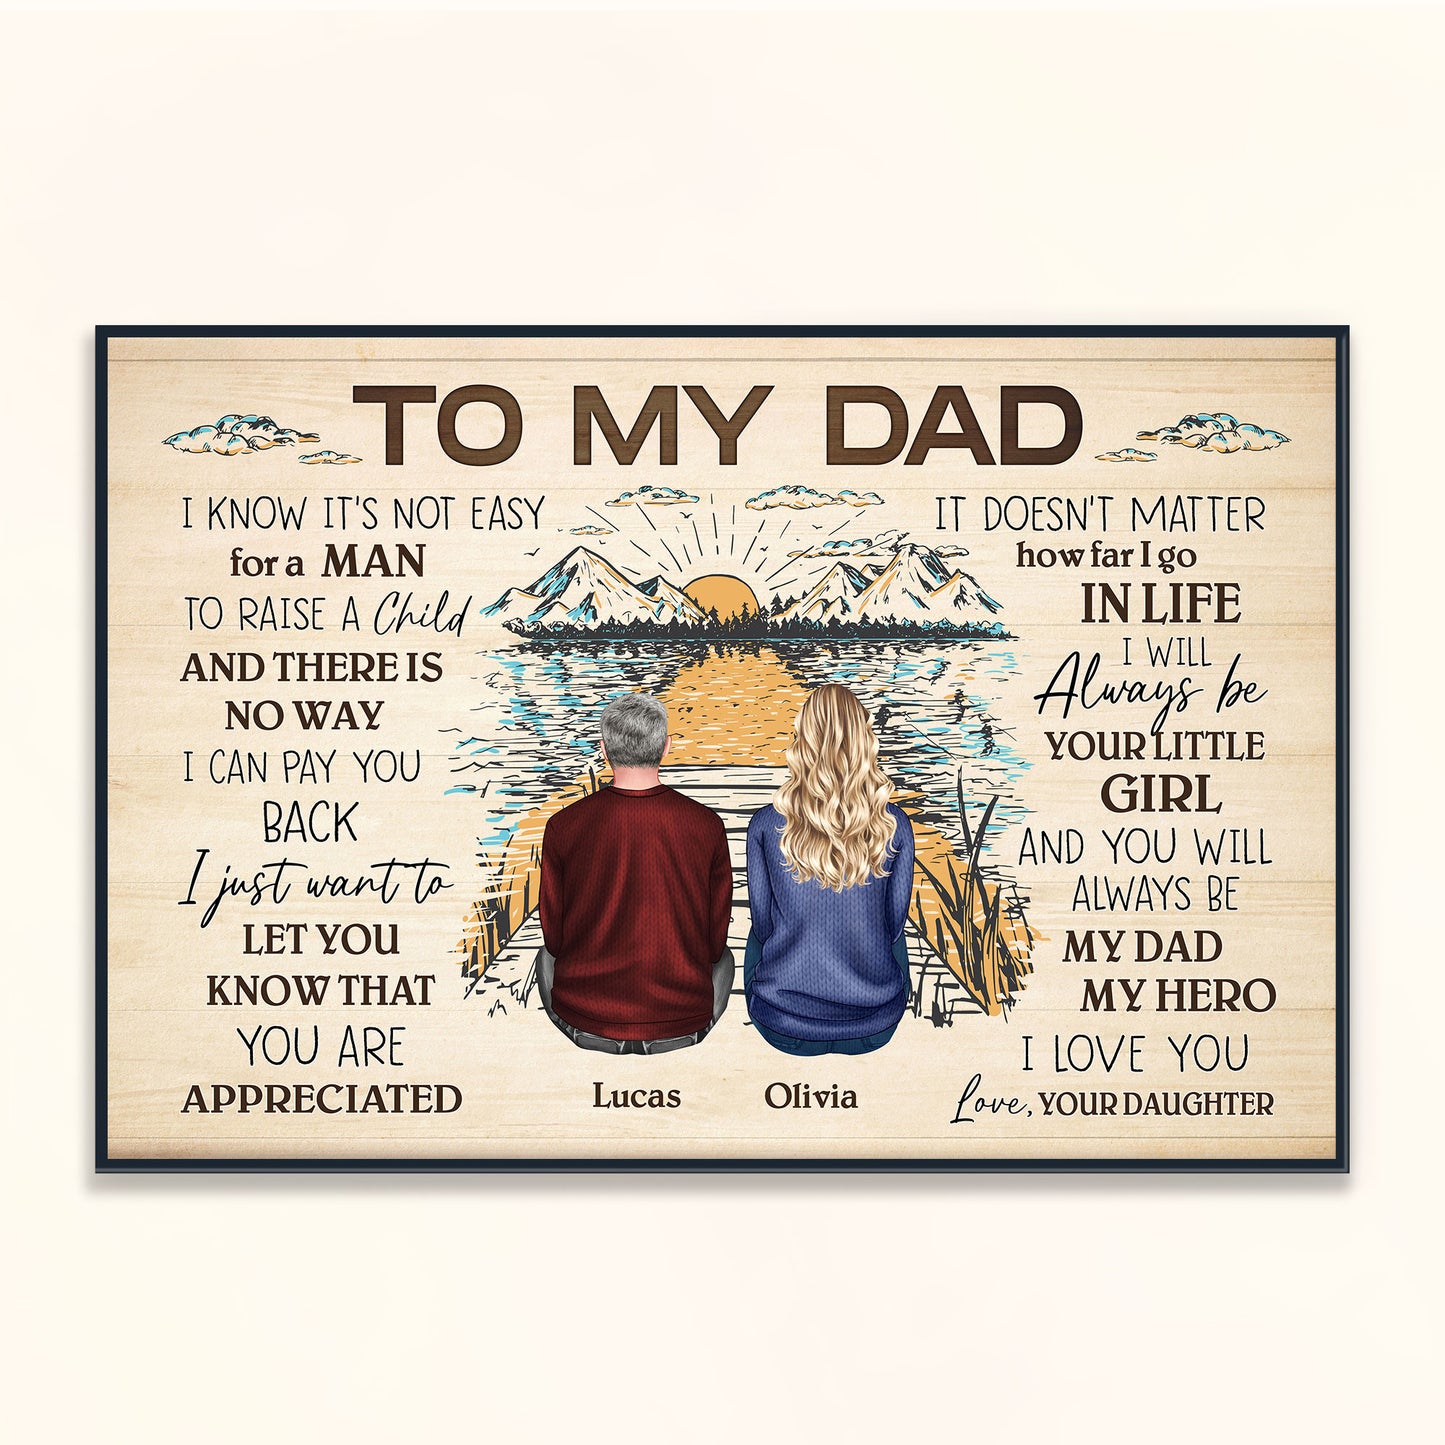 I Know It's Not Easy For A Man To Raise A Child - Personalized Poster